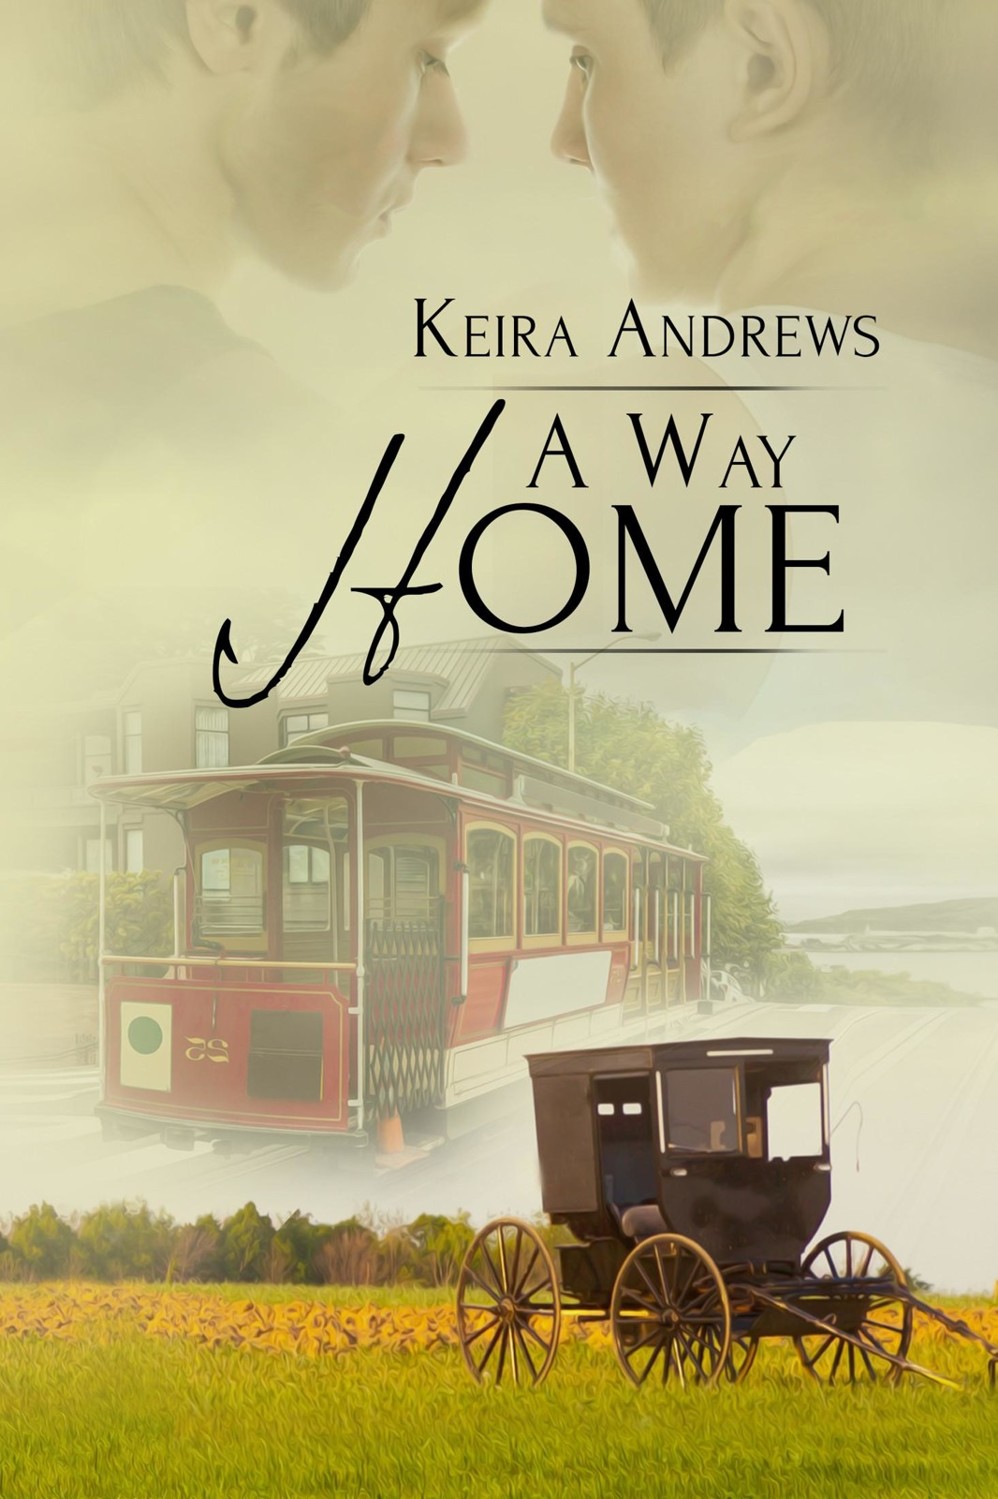 Gay Amish 03 - A Way Home by Keira Andrews